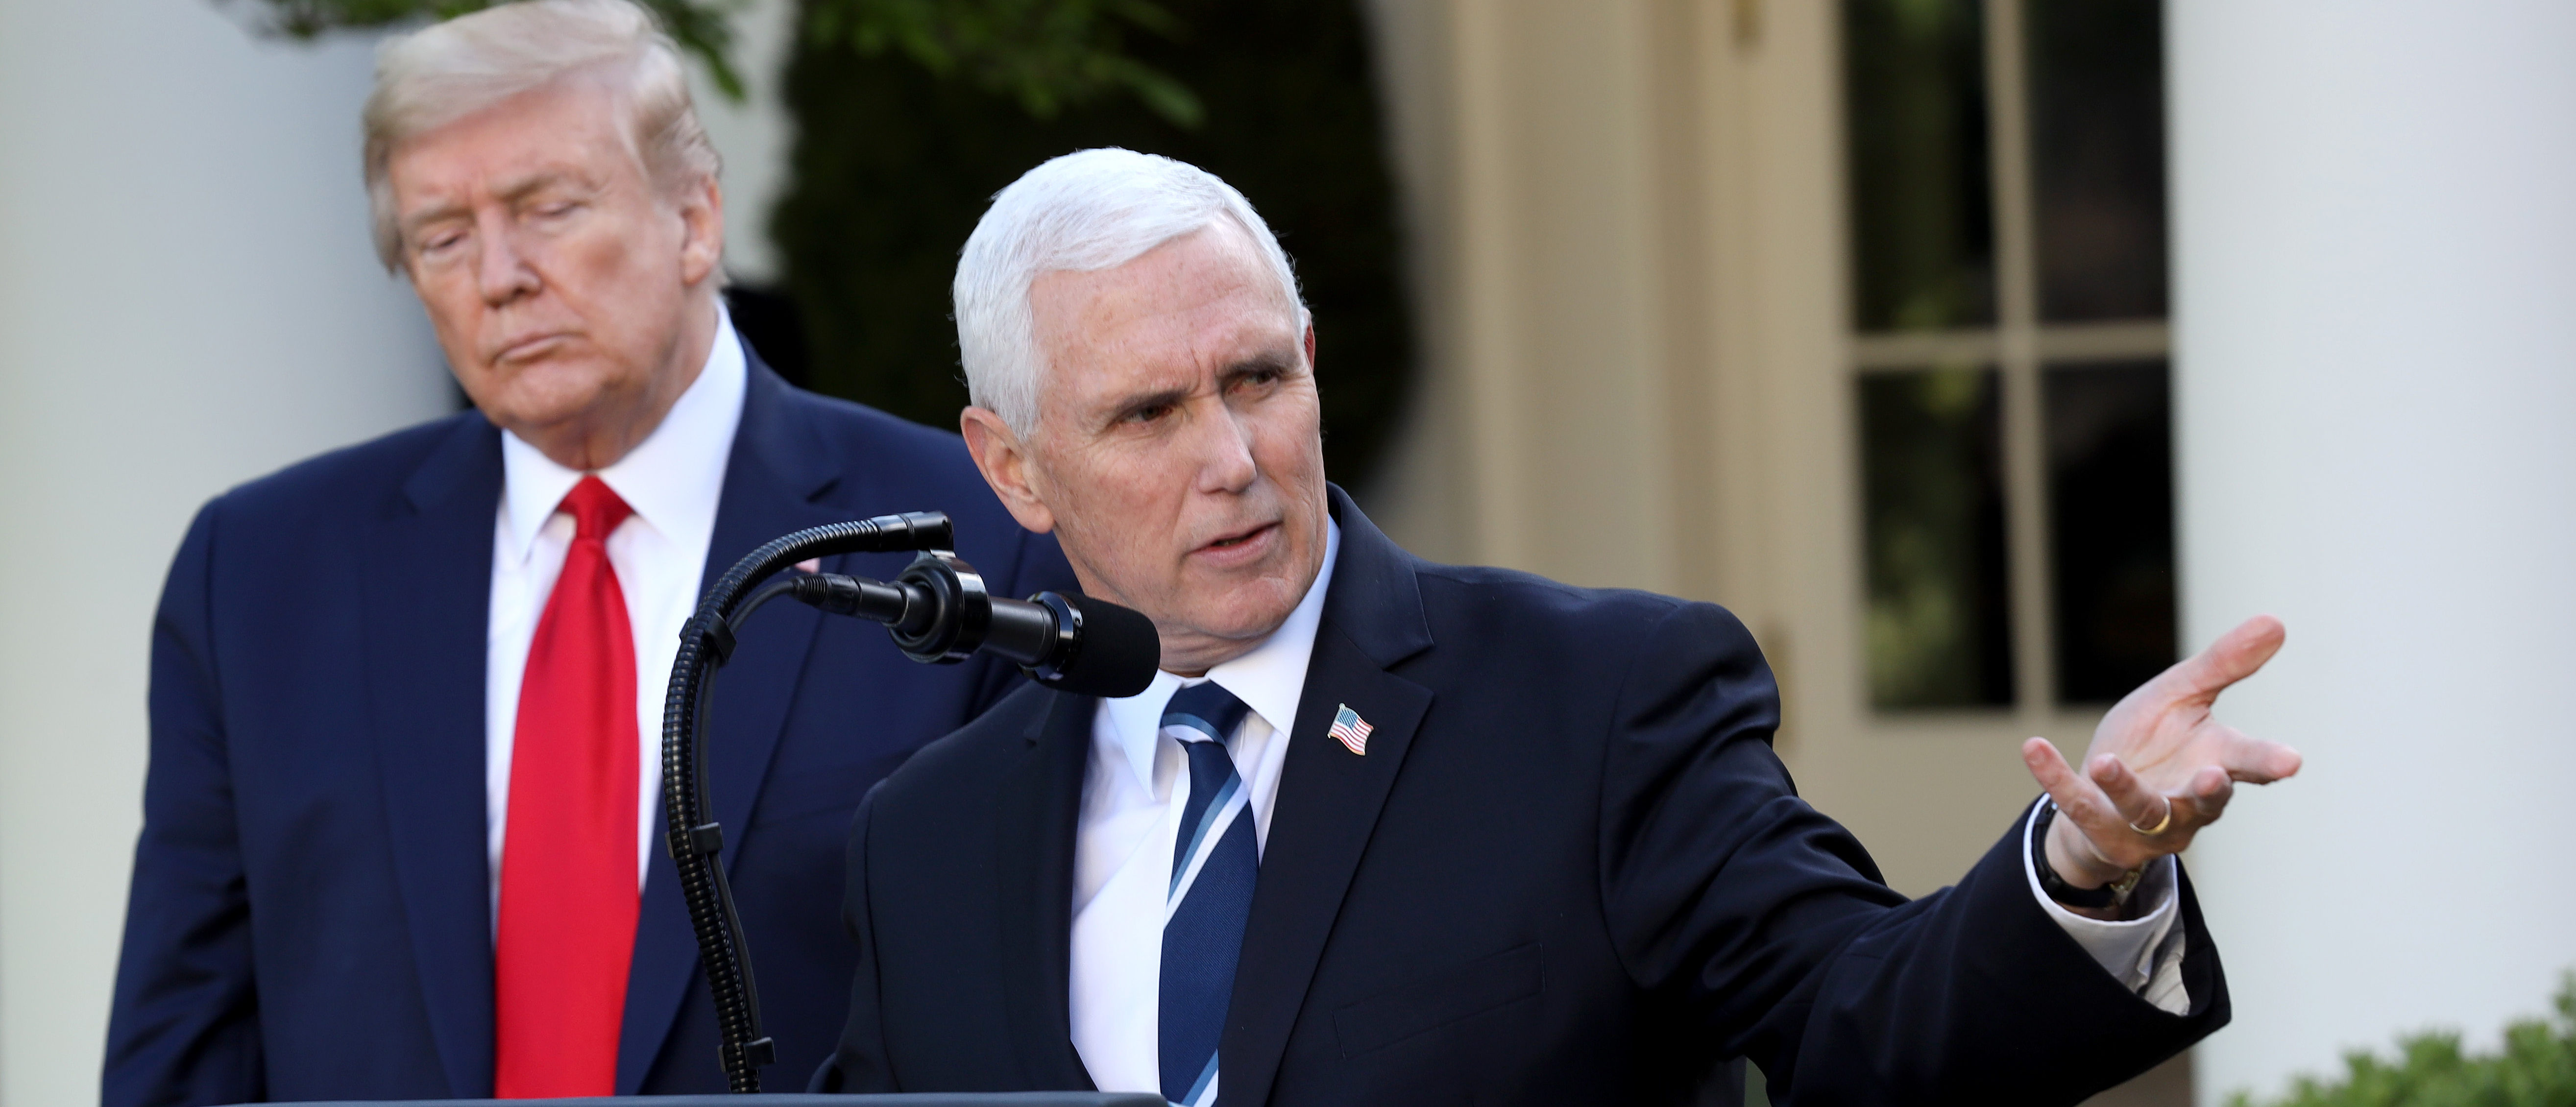 WASHINGTON, DC - APRIL 27: U.S. President Donald Trump listens as Vice president Mike Pence answers questions during the daily briefing of the coronavirus task force in the Rose Garden of the White House on April 27, 2020 in Washington, DC. Today's task force briefing is the first since Friday. (Photo by Win McNamee/Getty Images)